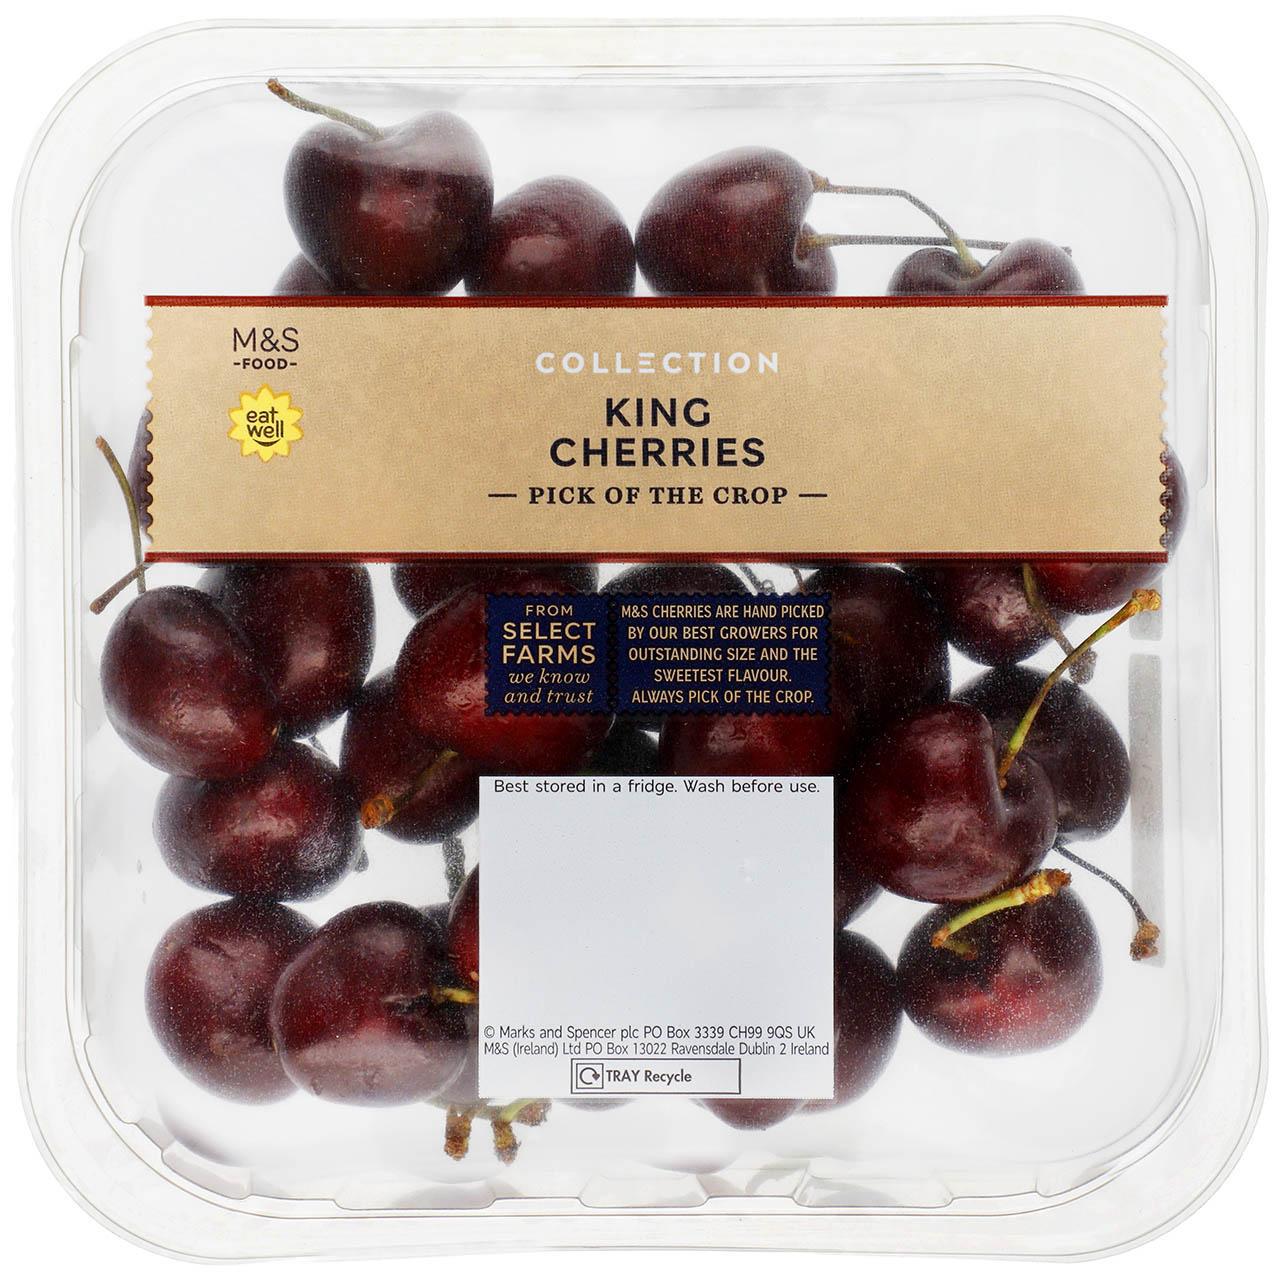 M&S Collection King Cherries 300g